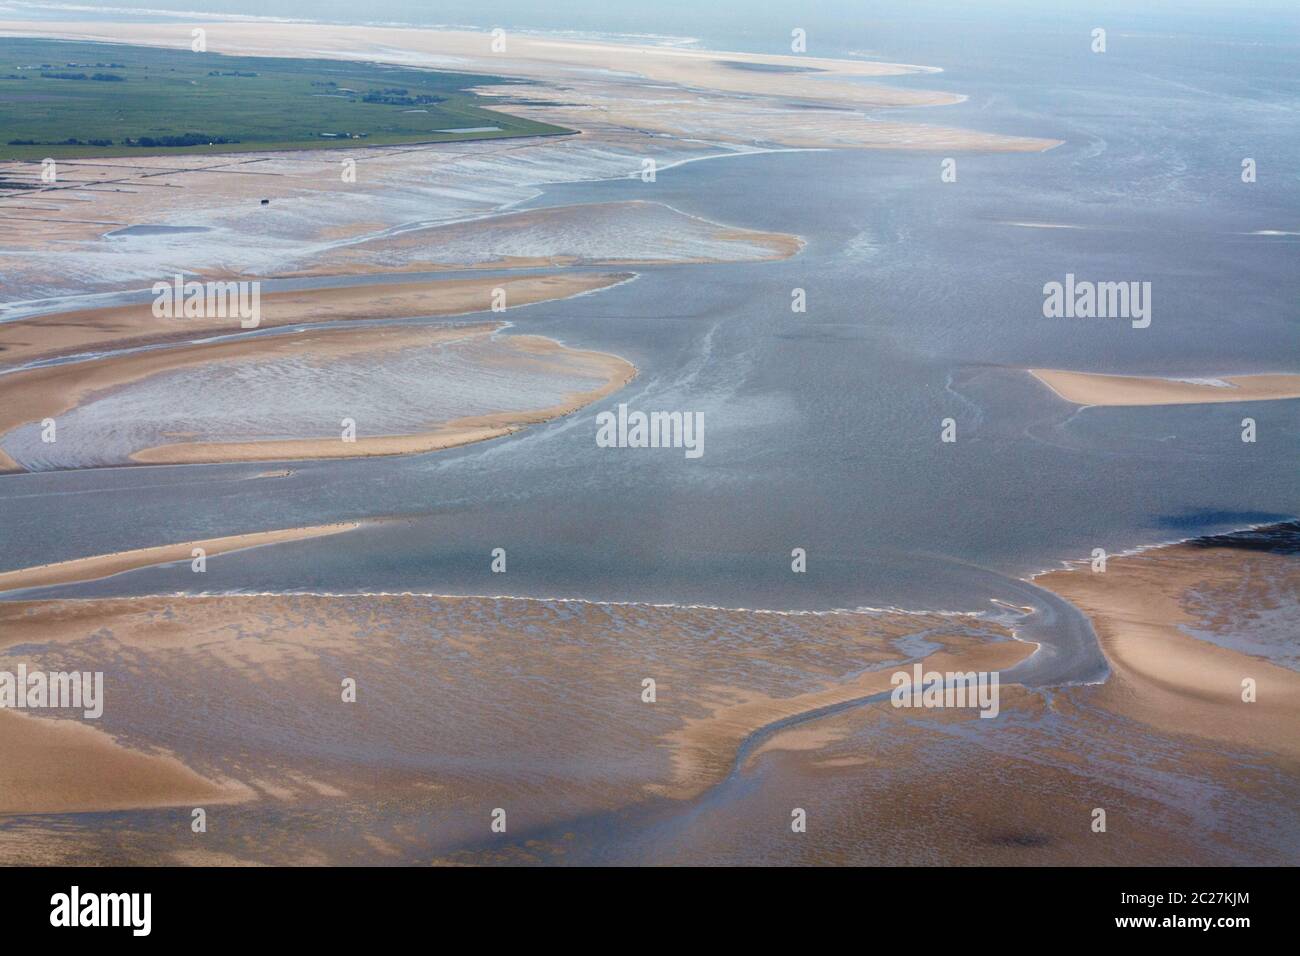 Eiderstedt, Aerial Photo of the Schleswig-Holstein Wadden Sea National Park in Germany Stock Photo